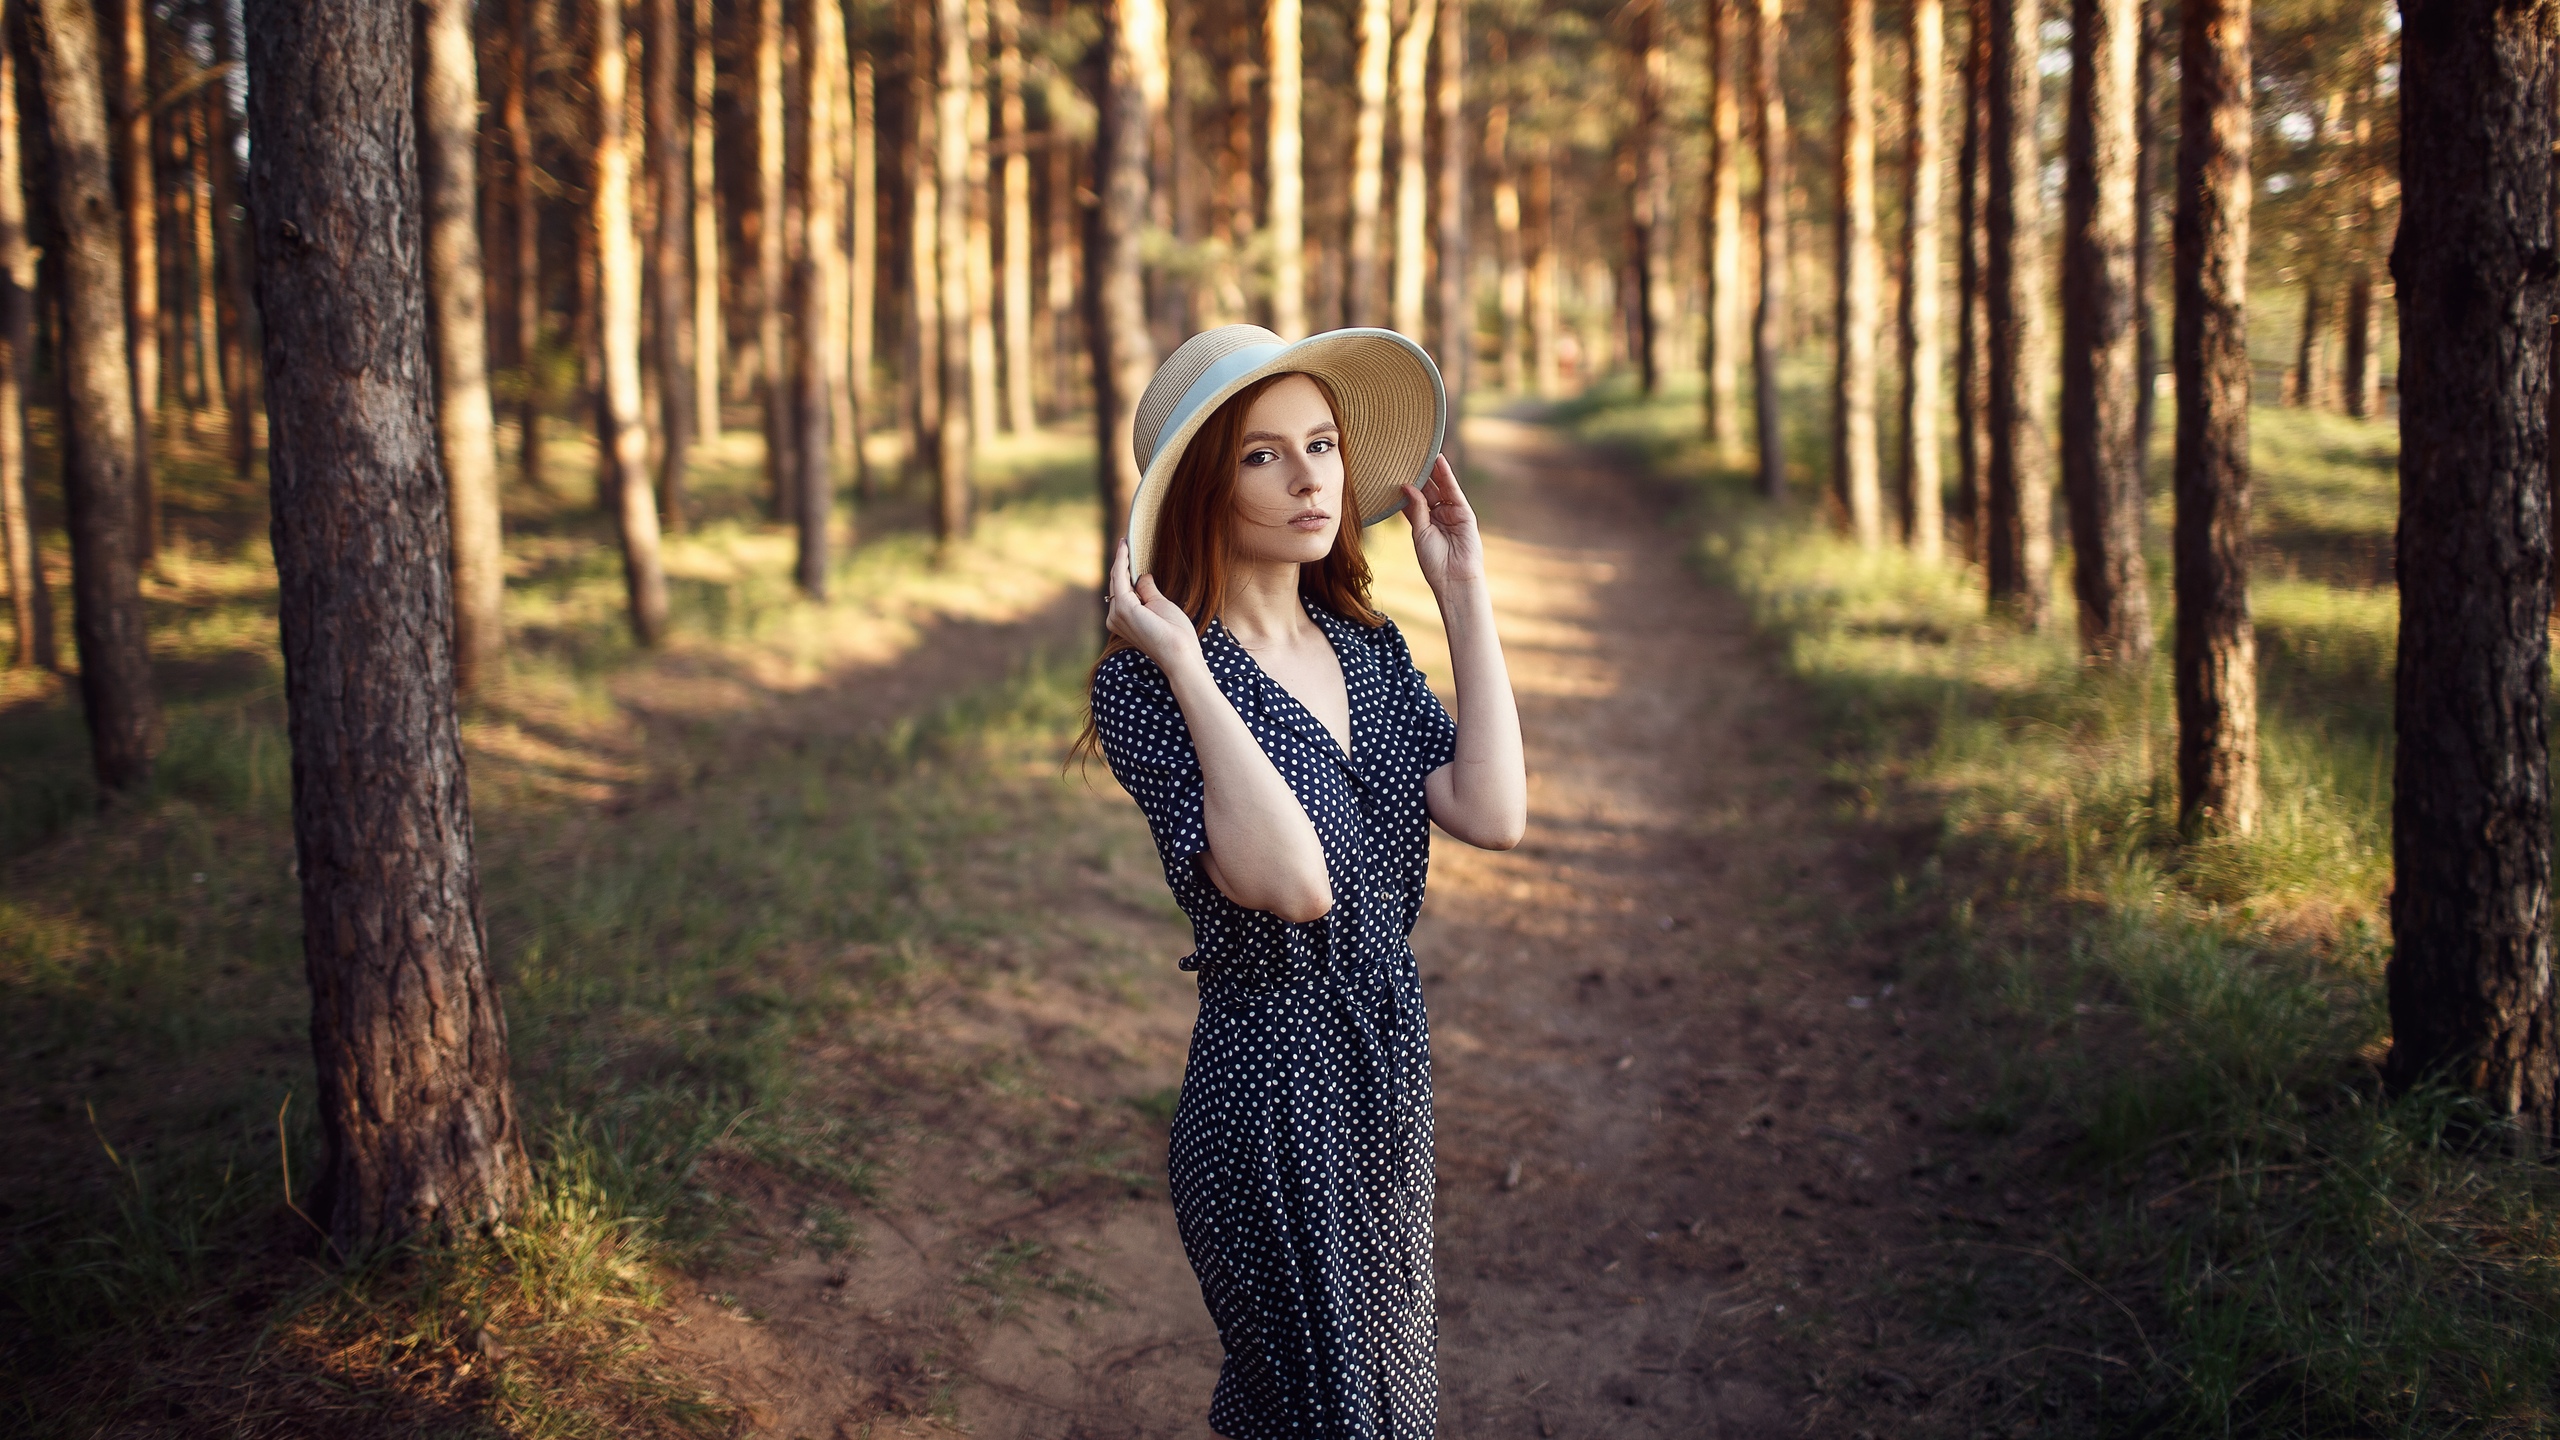 People 2560x1440 women model brunette portrait hat women with hats dress polka dots depth of field forest trees outdoors women outdoors looking at viewer cleavage photography